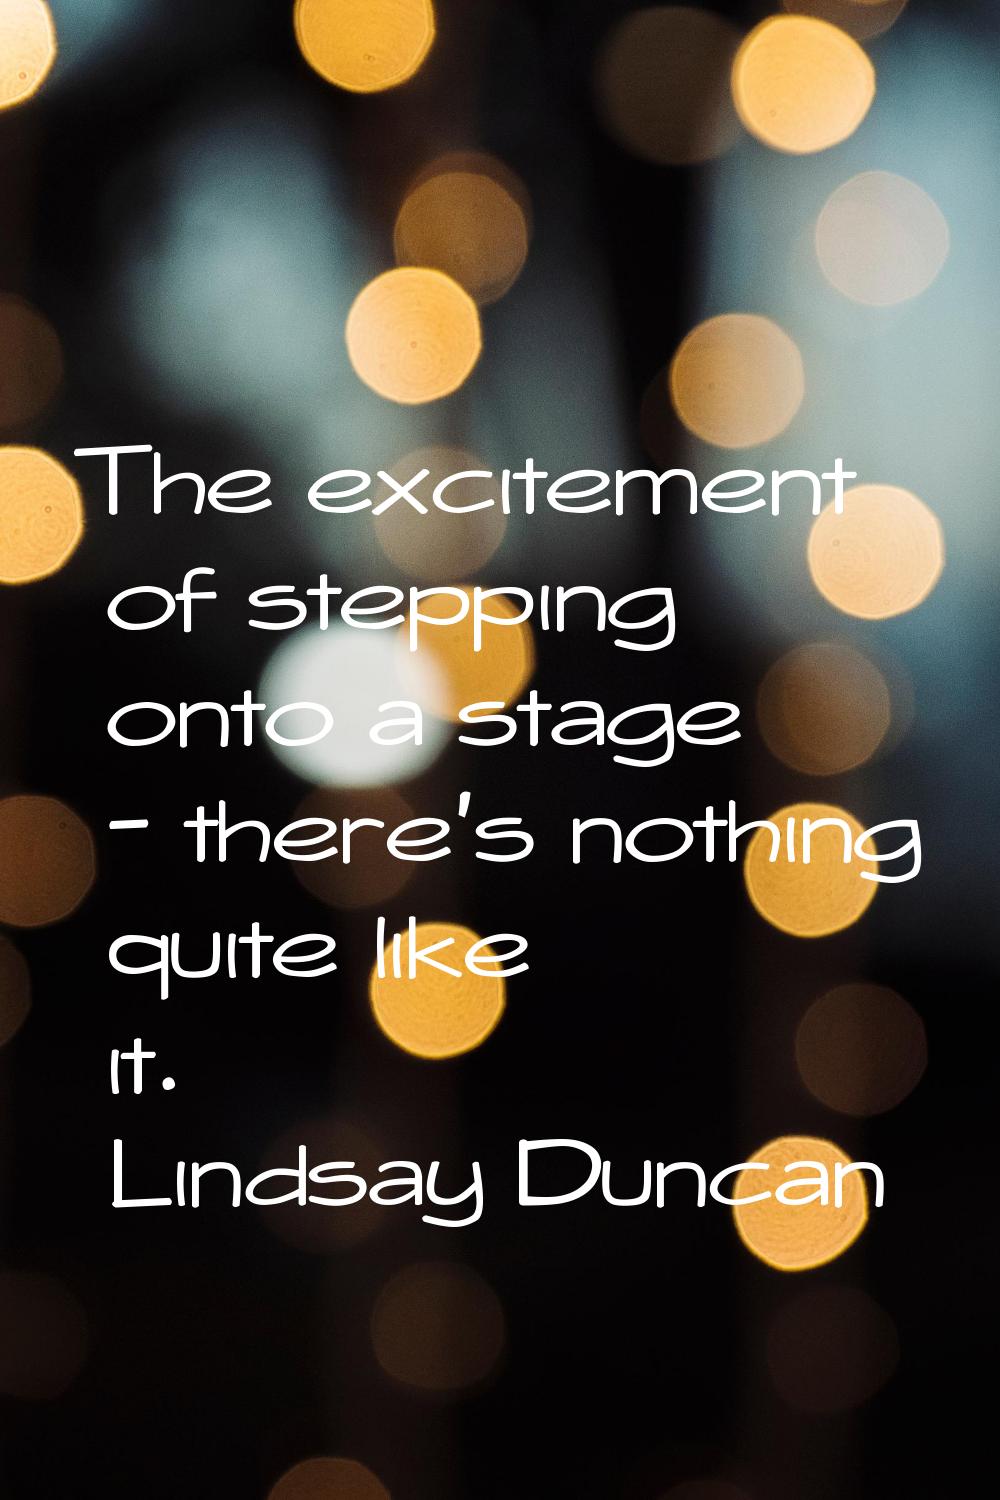 The excitement of stepping onto a stage - there's nothing quite like it.